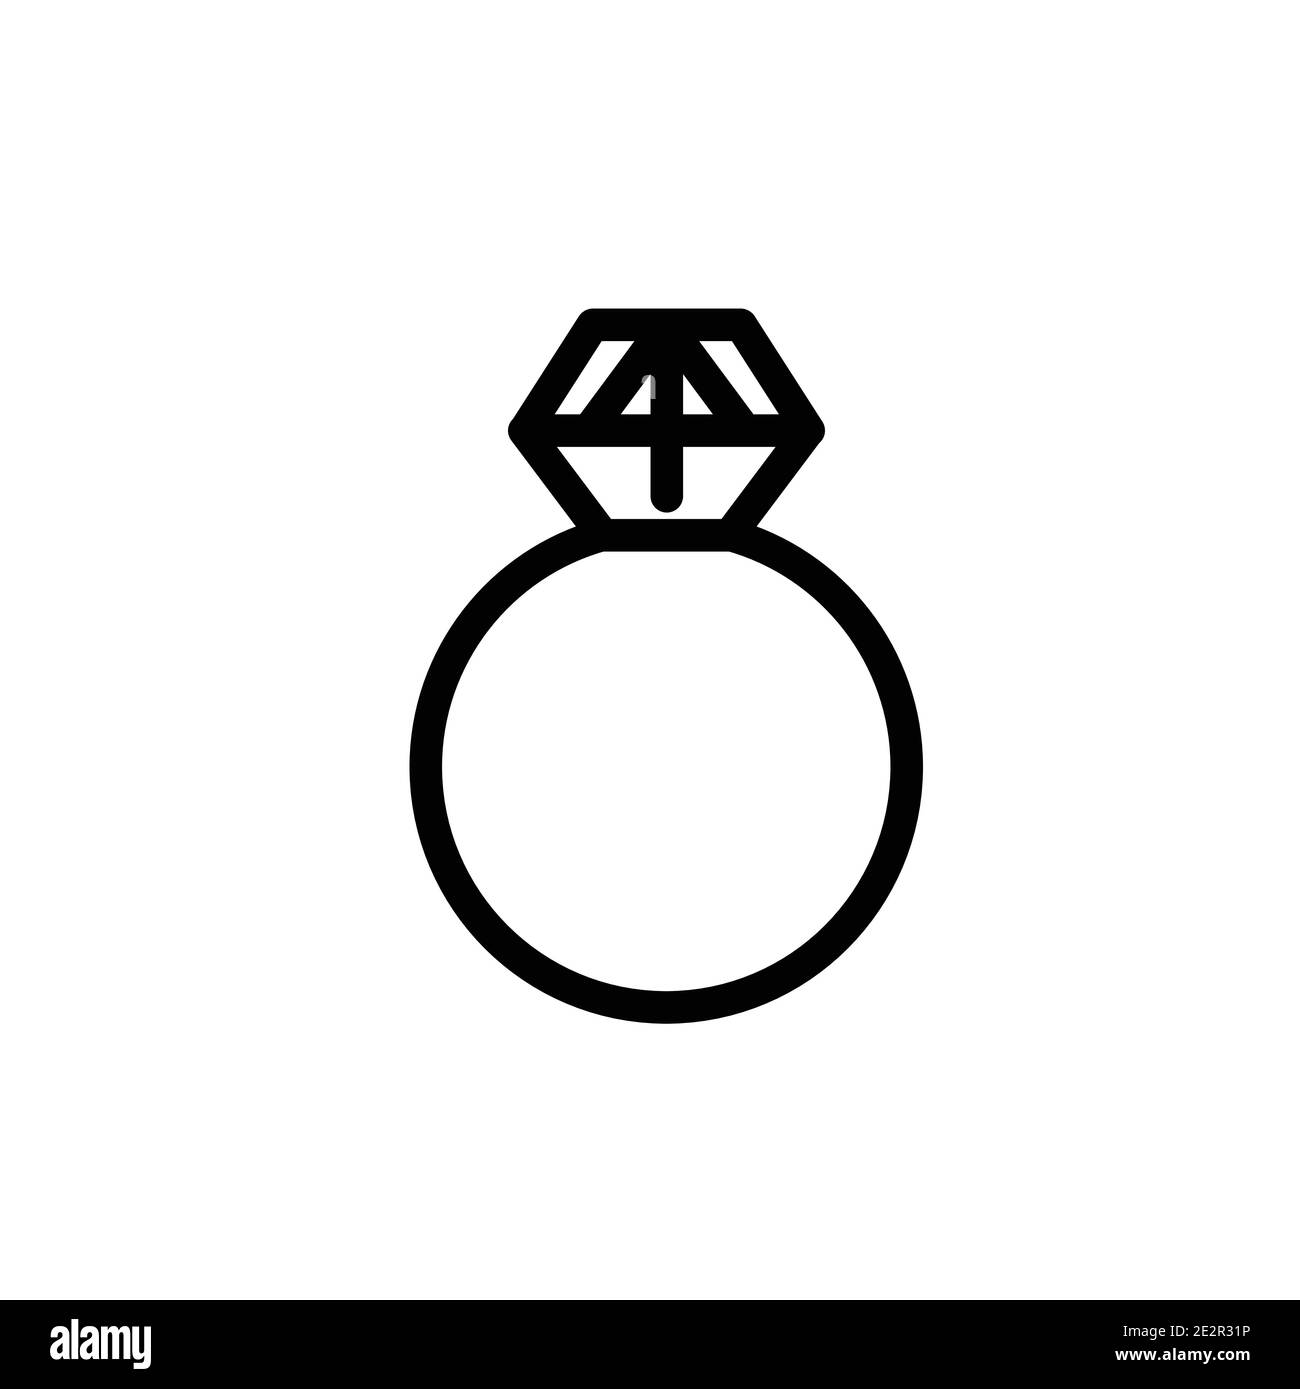 Ring Vector Icon Simple Outline Style Stock Vector (Royalty Free) 605331836  | Shutterstock